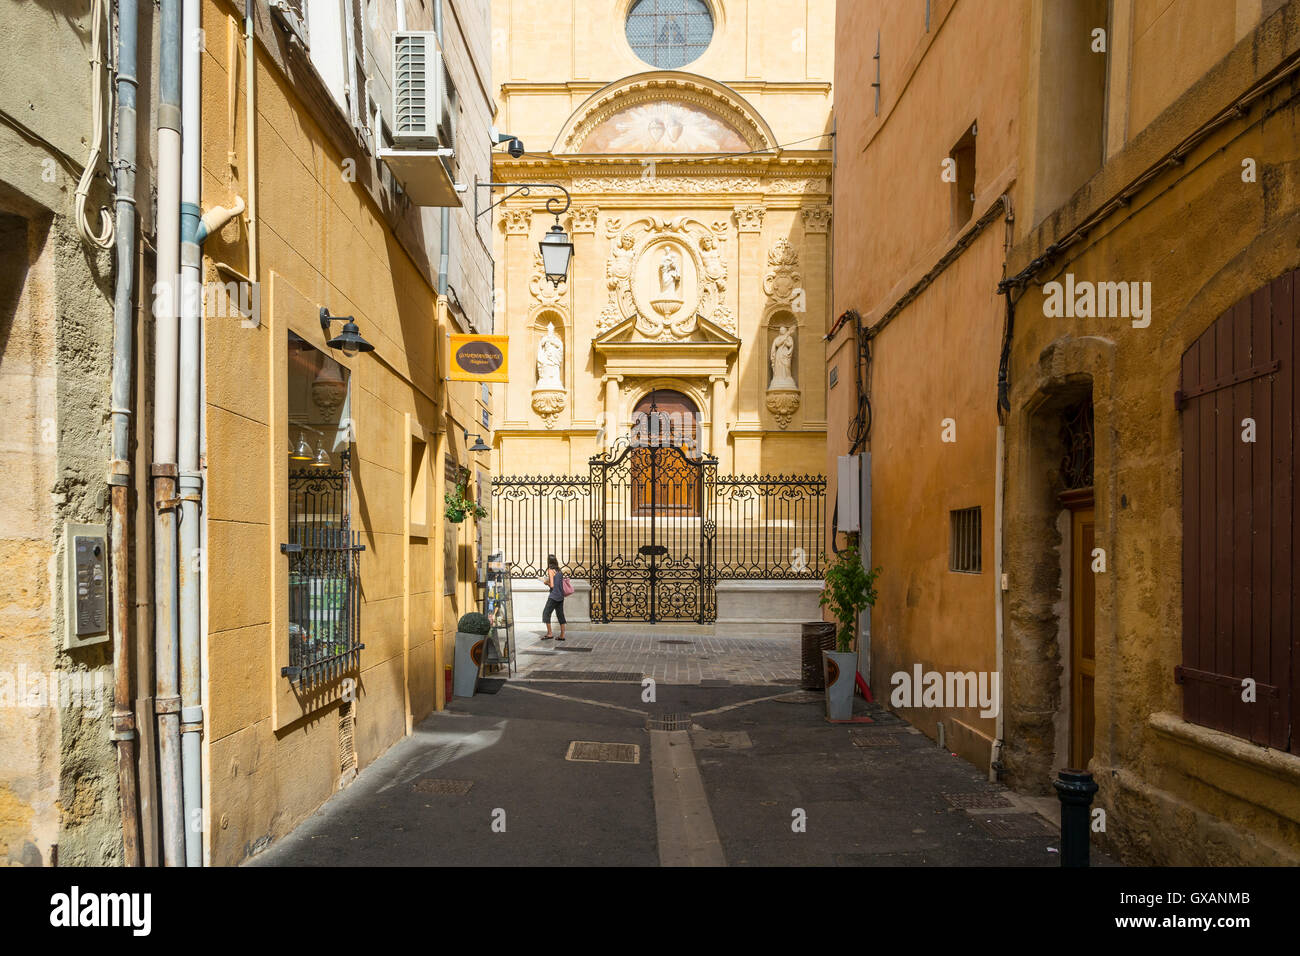 Aix en provence,France-August 9,2016:People strolling down the typical streets of Aix-en-Provence during a summer day. Stock Photo